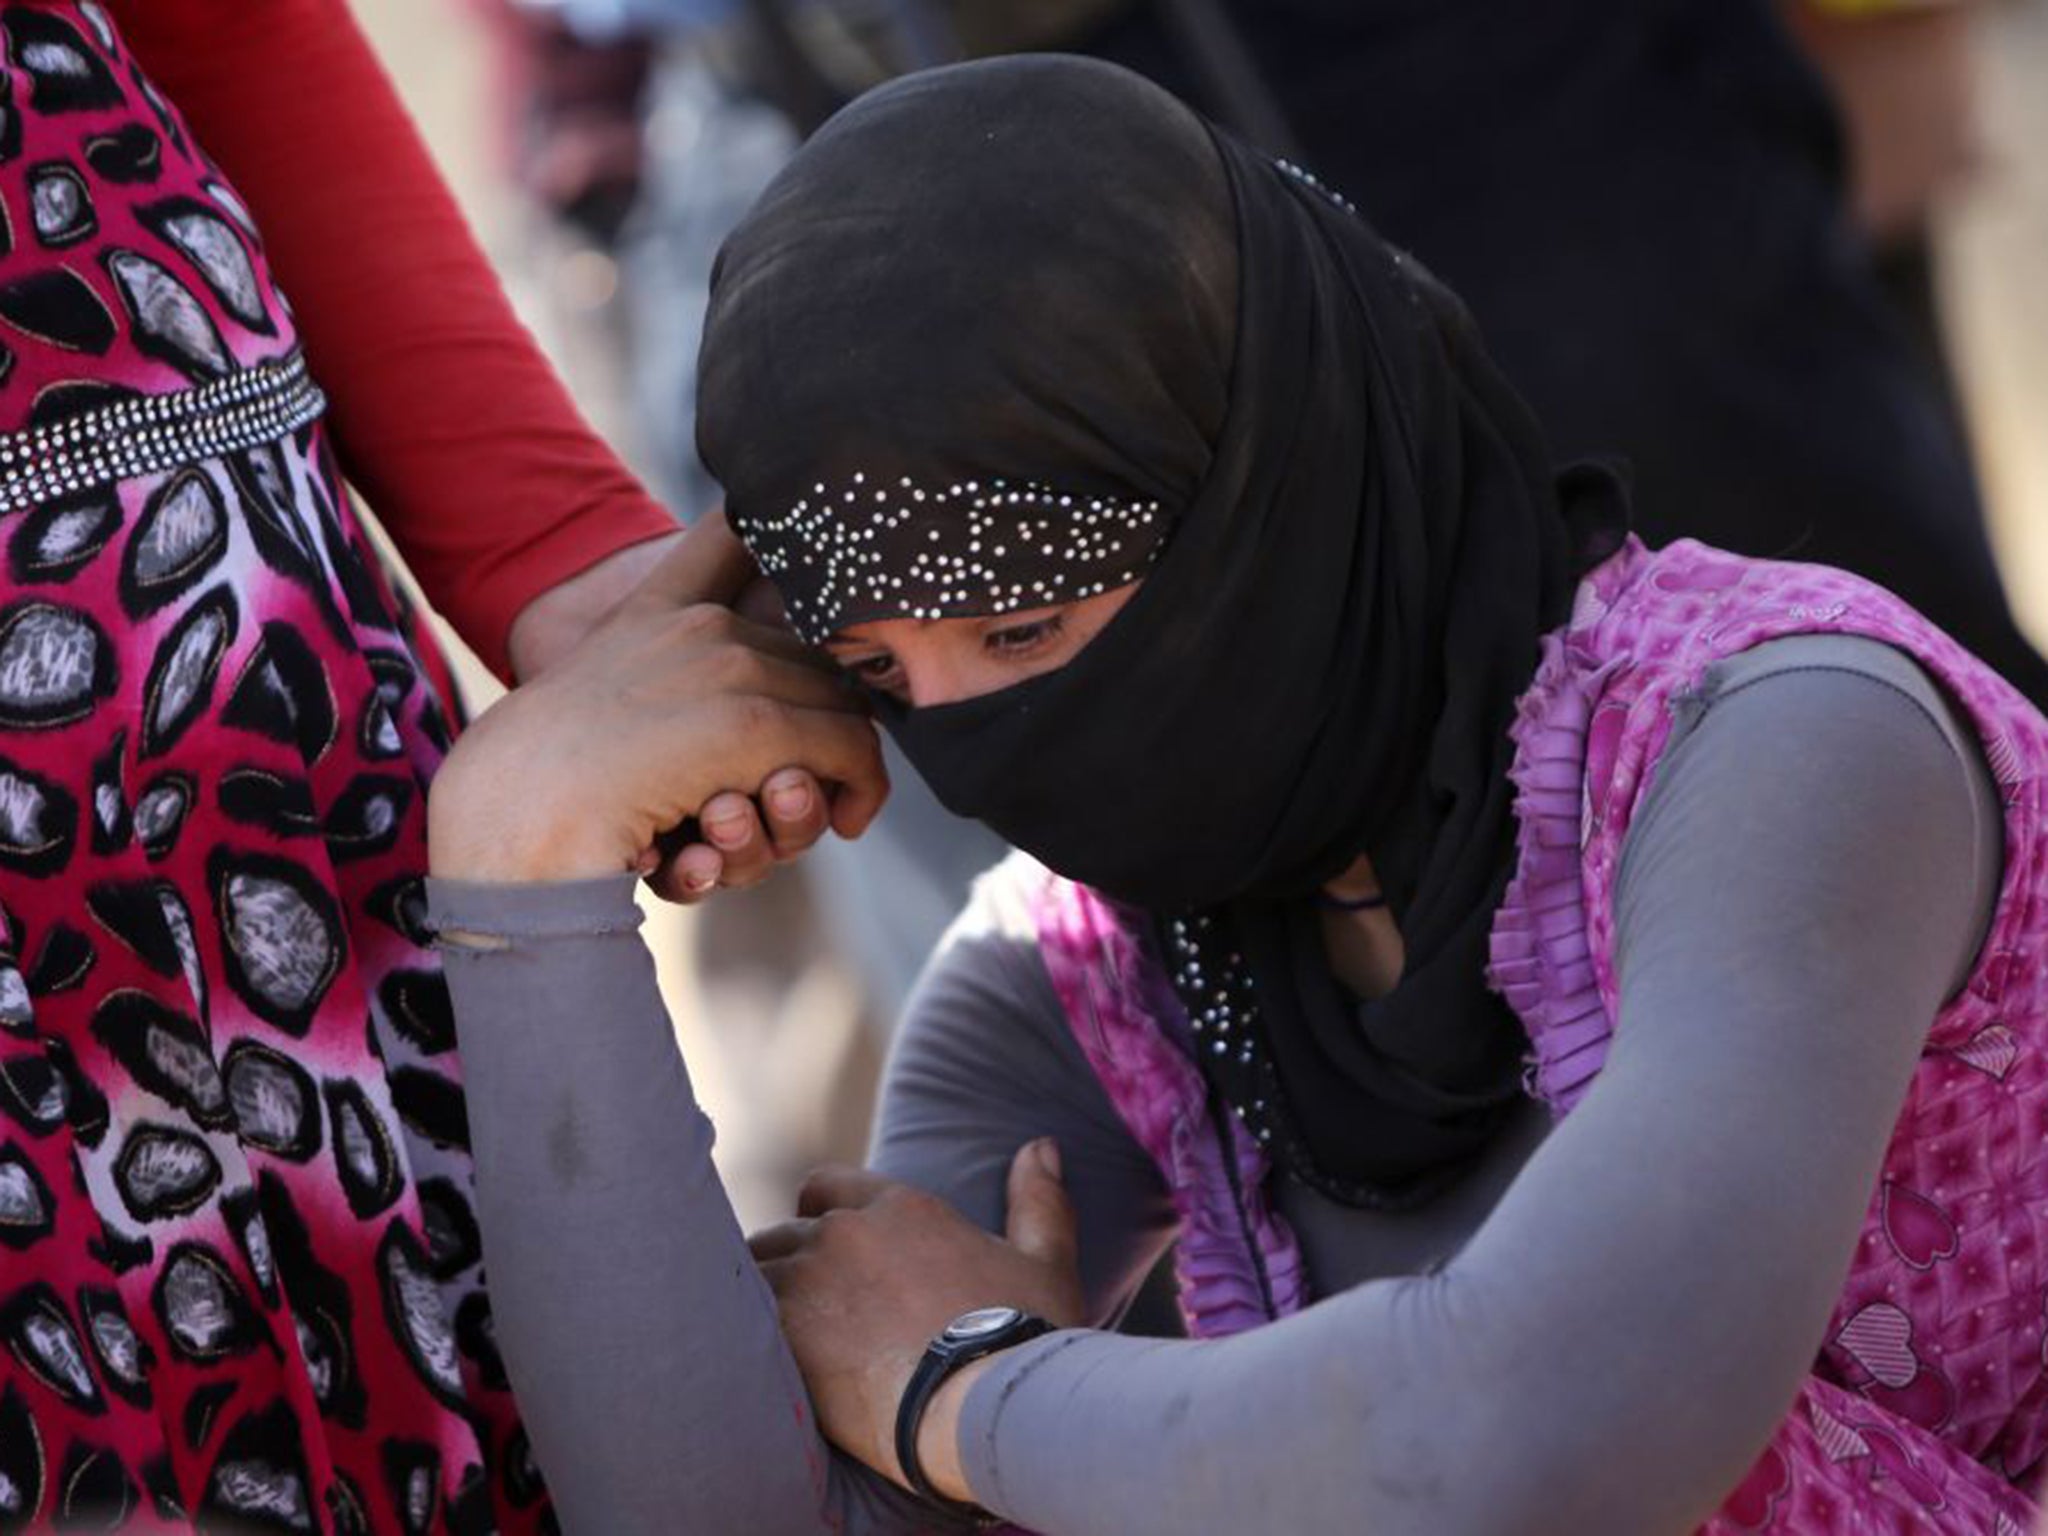 Thousands of Yazidi woman have already been sold into slavery by Isis